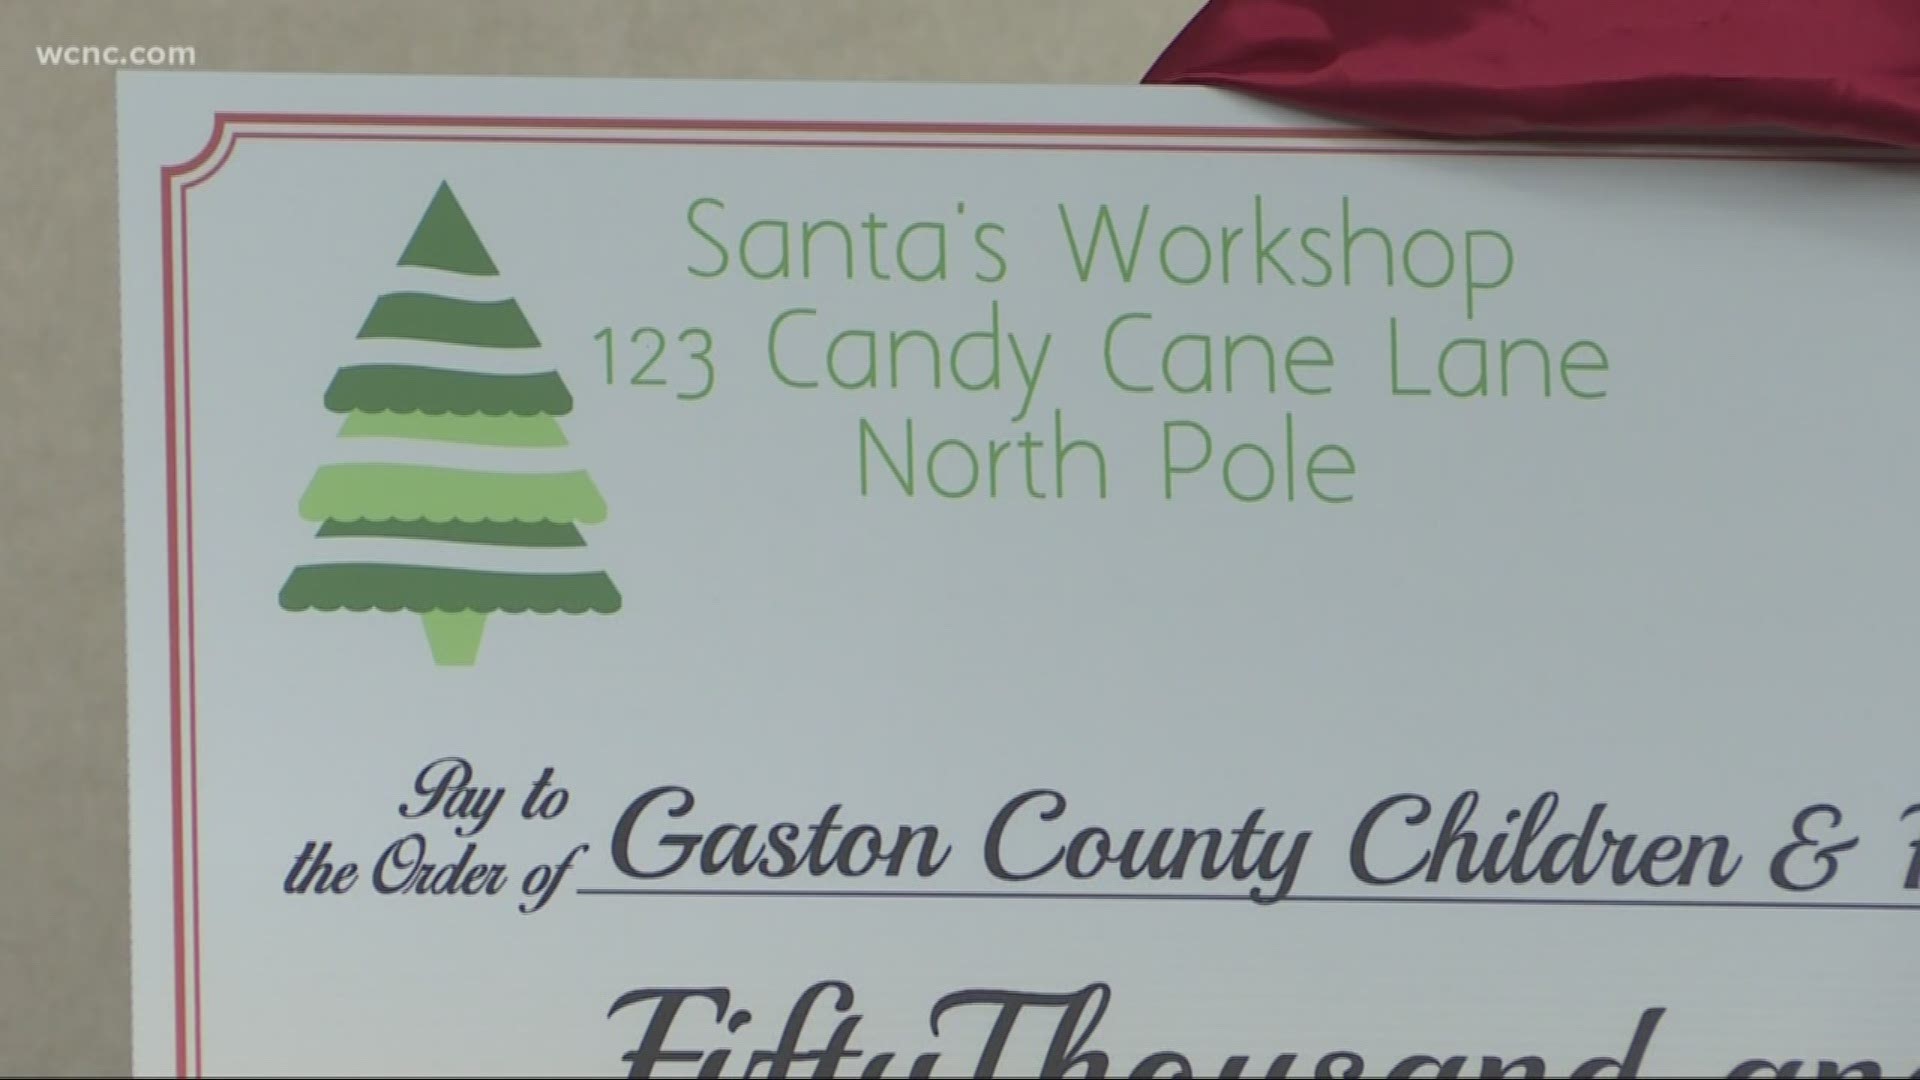 An anonymous donor is giving away $50,000 worth of toys to Gaston County children in need.